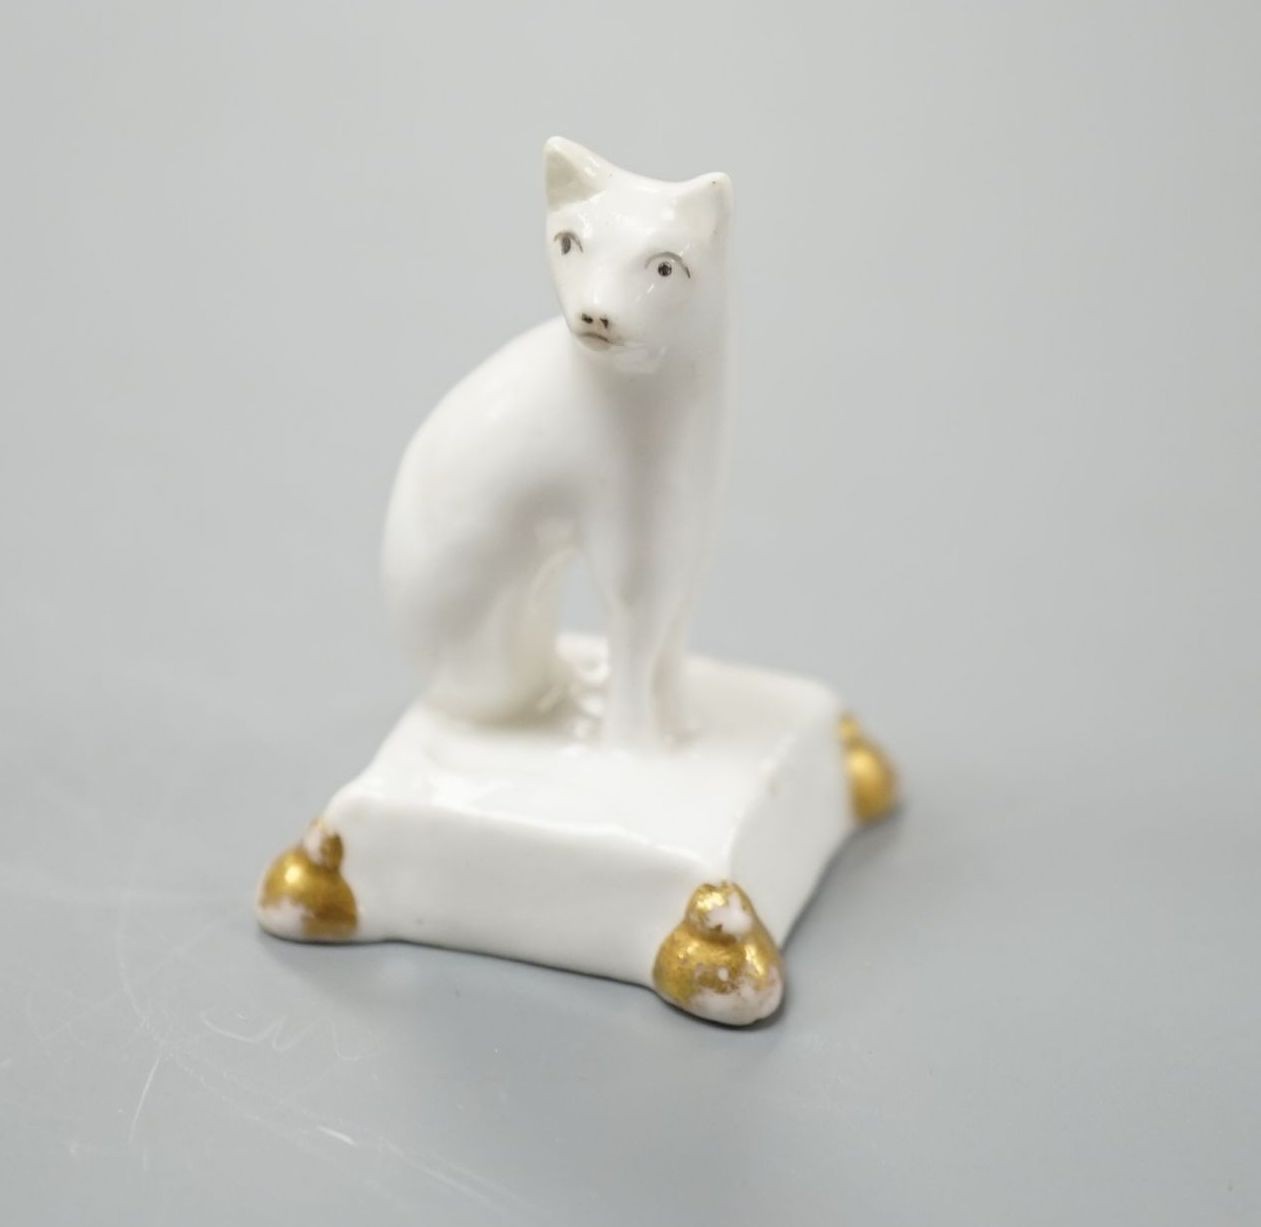 A rare English porcelain model of a cat seated on a cushion base, possibly Derby, c.1820-30, 4cm high, Provenance: Dennis G.Rice collection